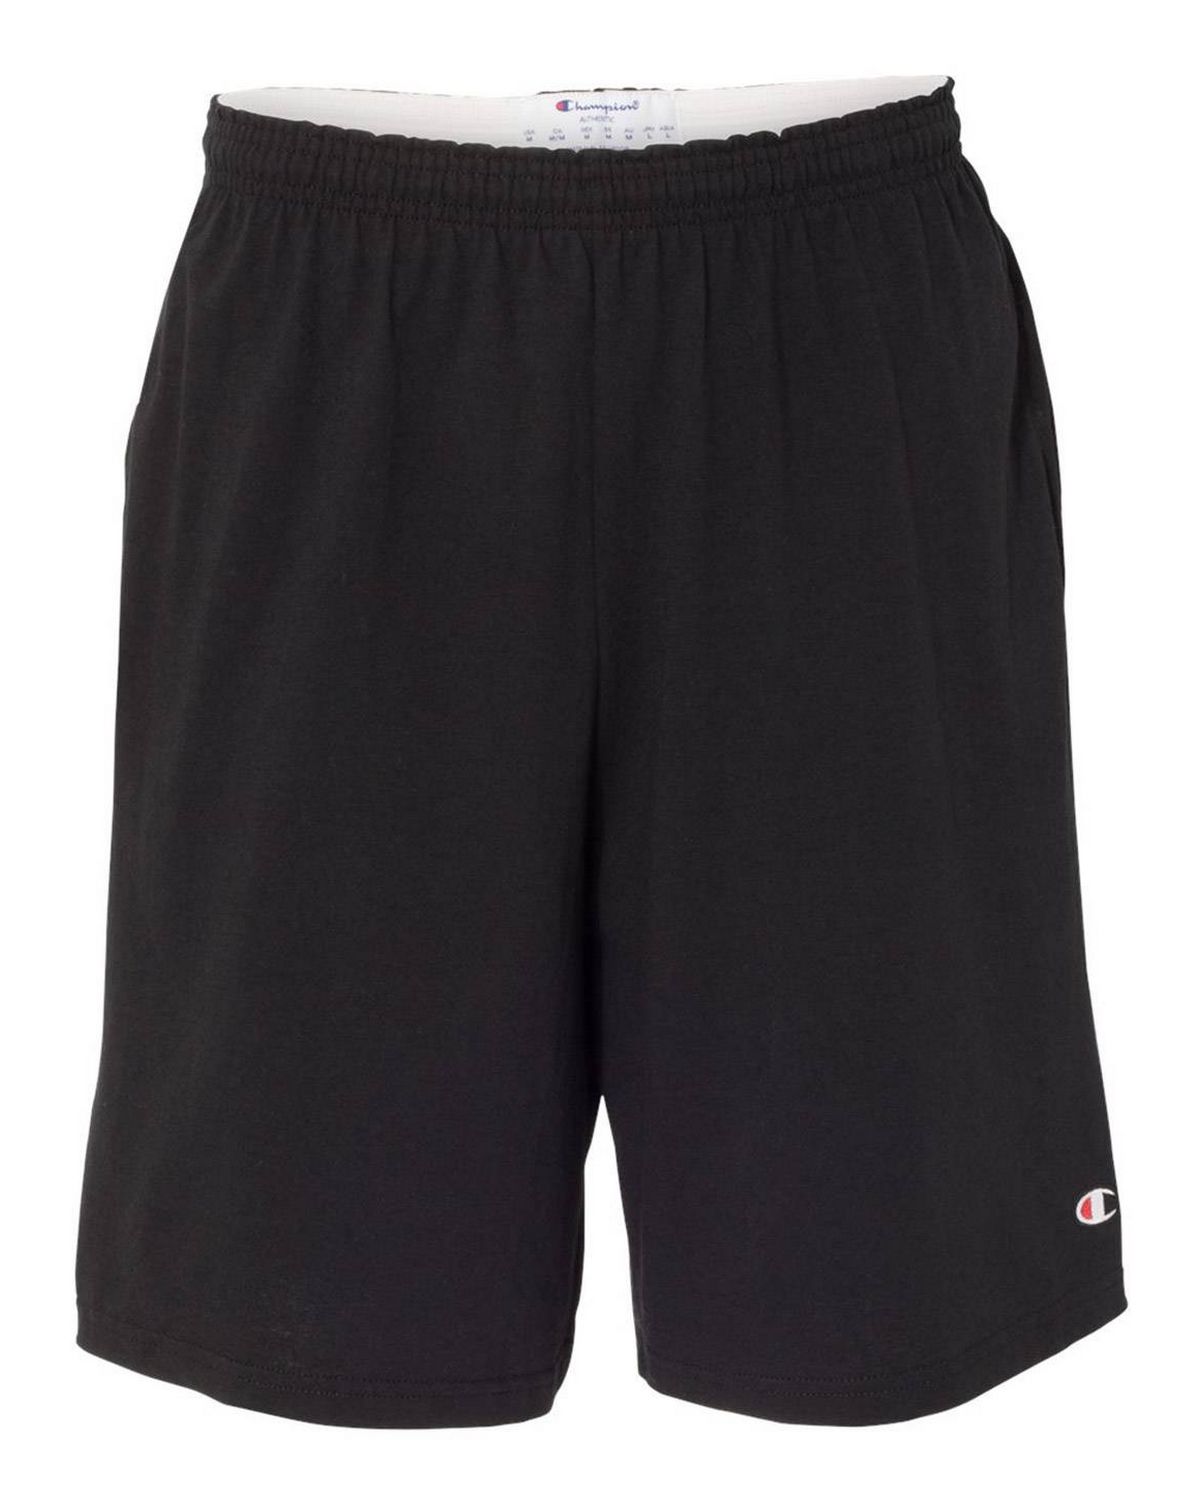 Grey for sale online Champion Men's 9" Jersey Short with Pockets Size S 